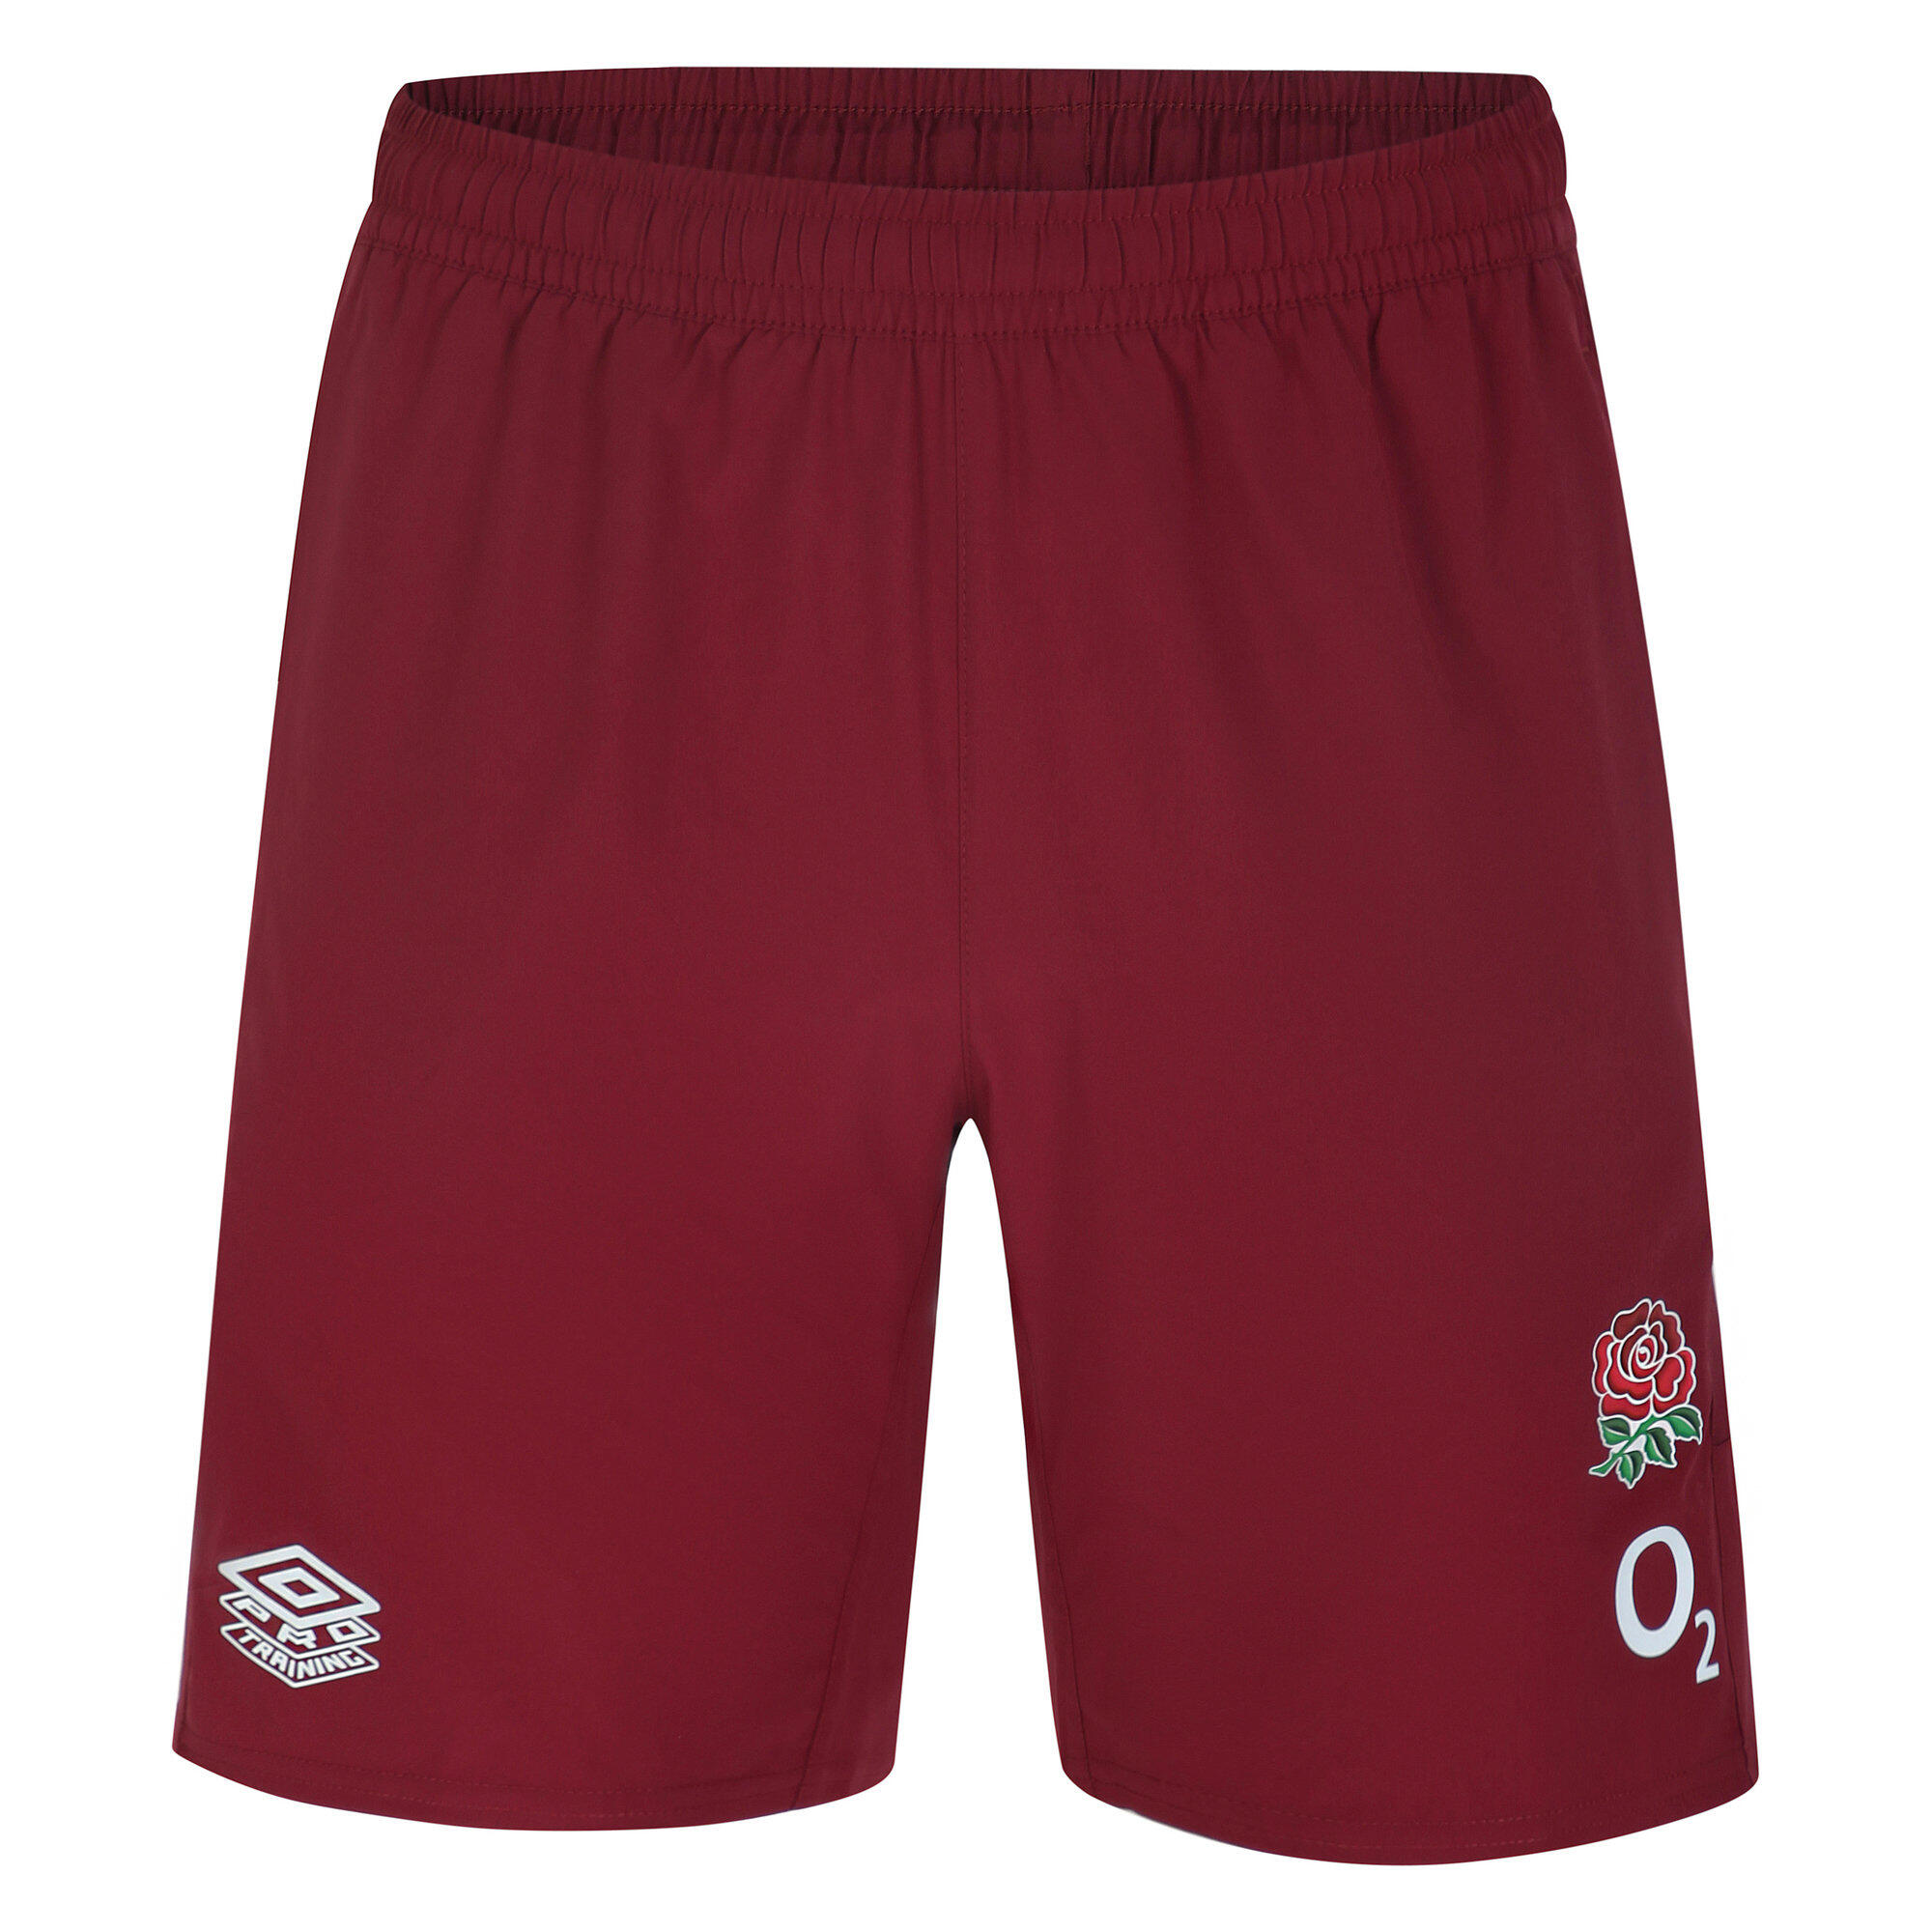 Mens 23/24 England Rugby Gym Shorts (Tibetan Red) 1/4